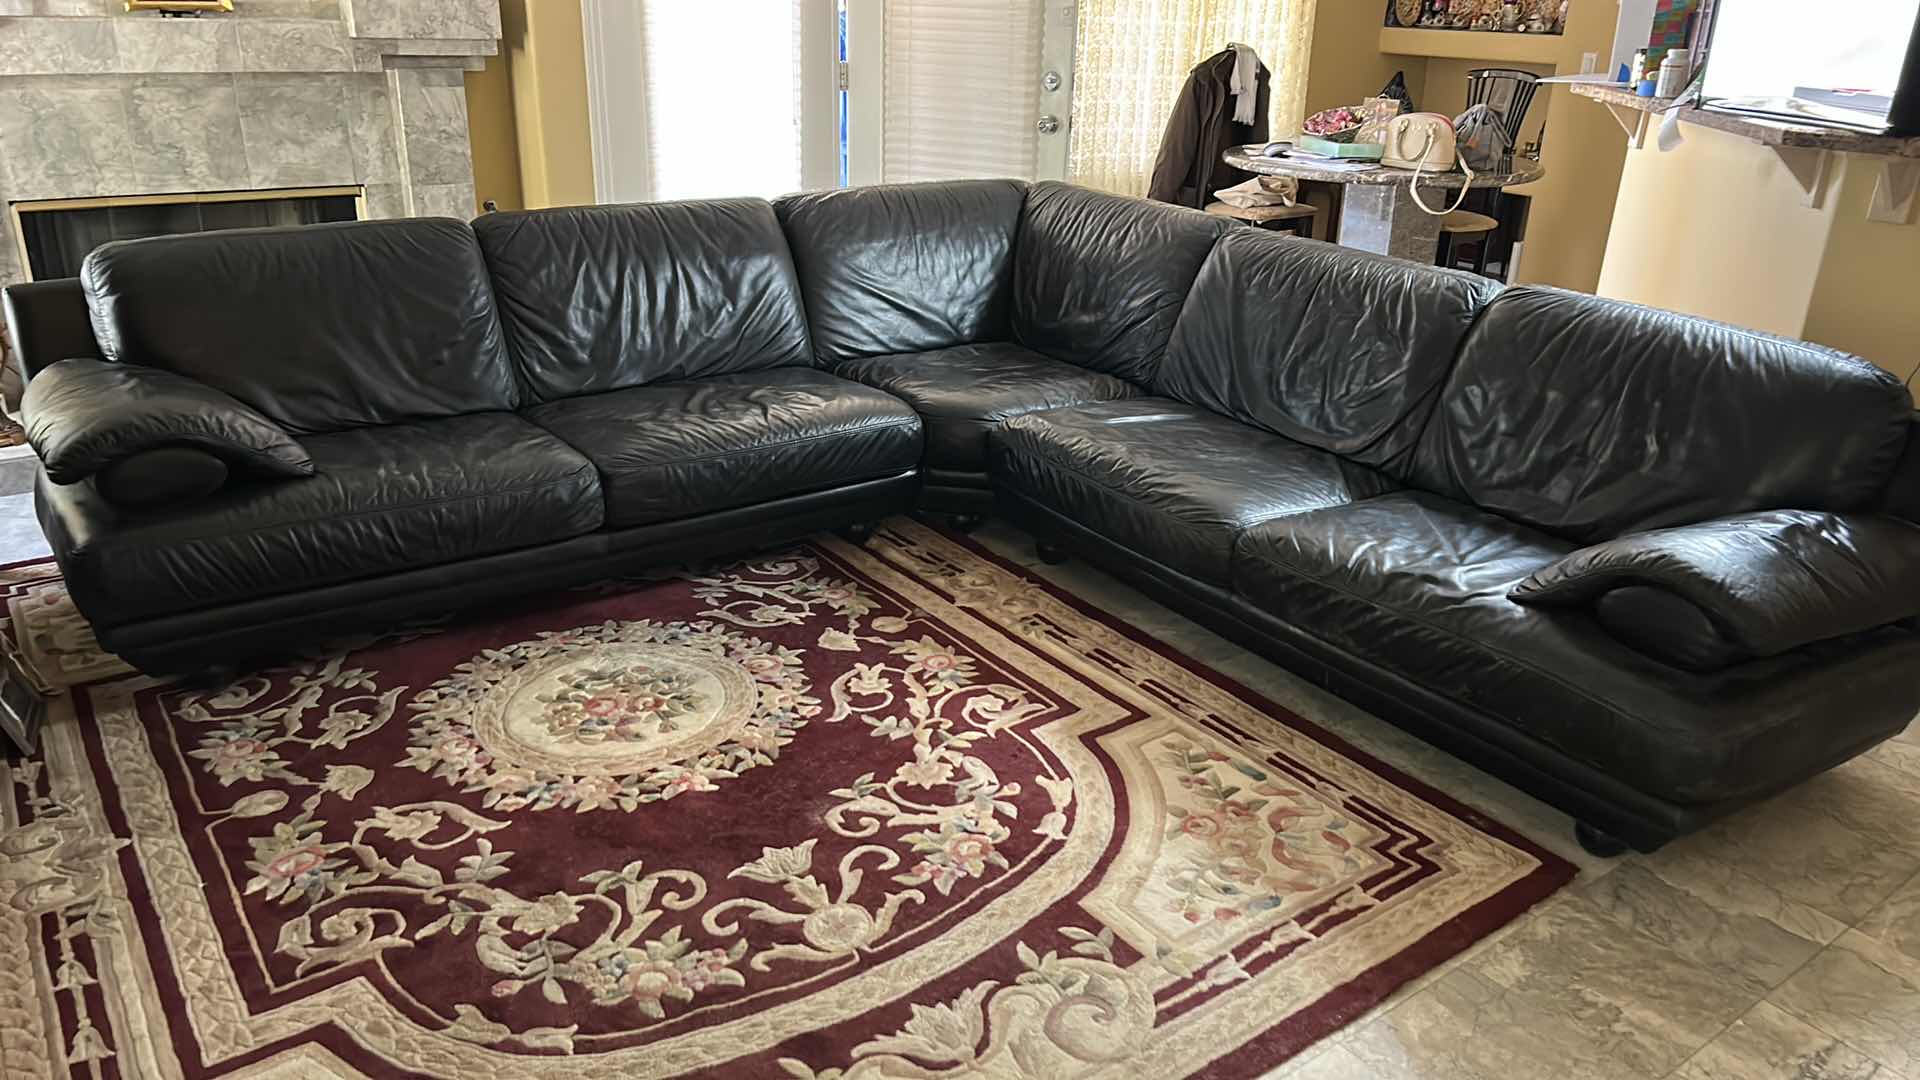 Photo 1 of BLACK LEATHER 3 PIECE SOFA SECTIONAL 2 PIECES 73”
x 39” H32”, CORNER 37” WIDE ( SEE NOTES)